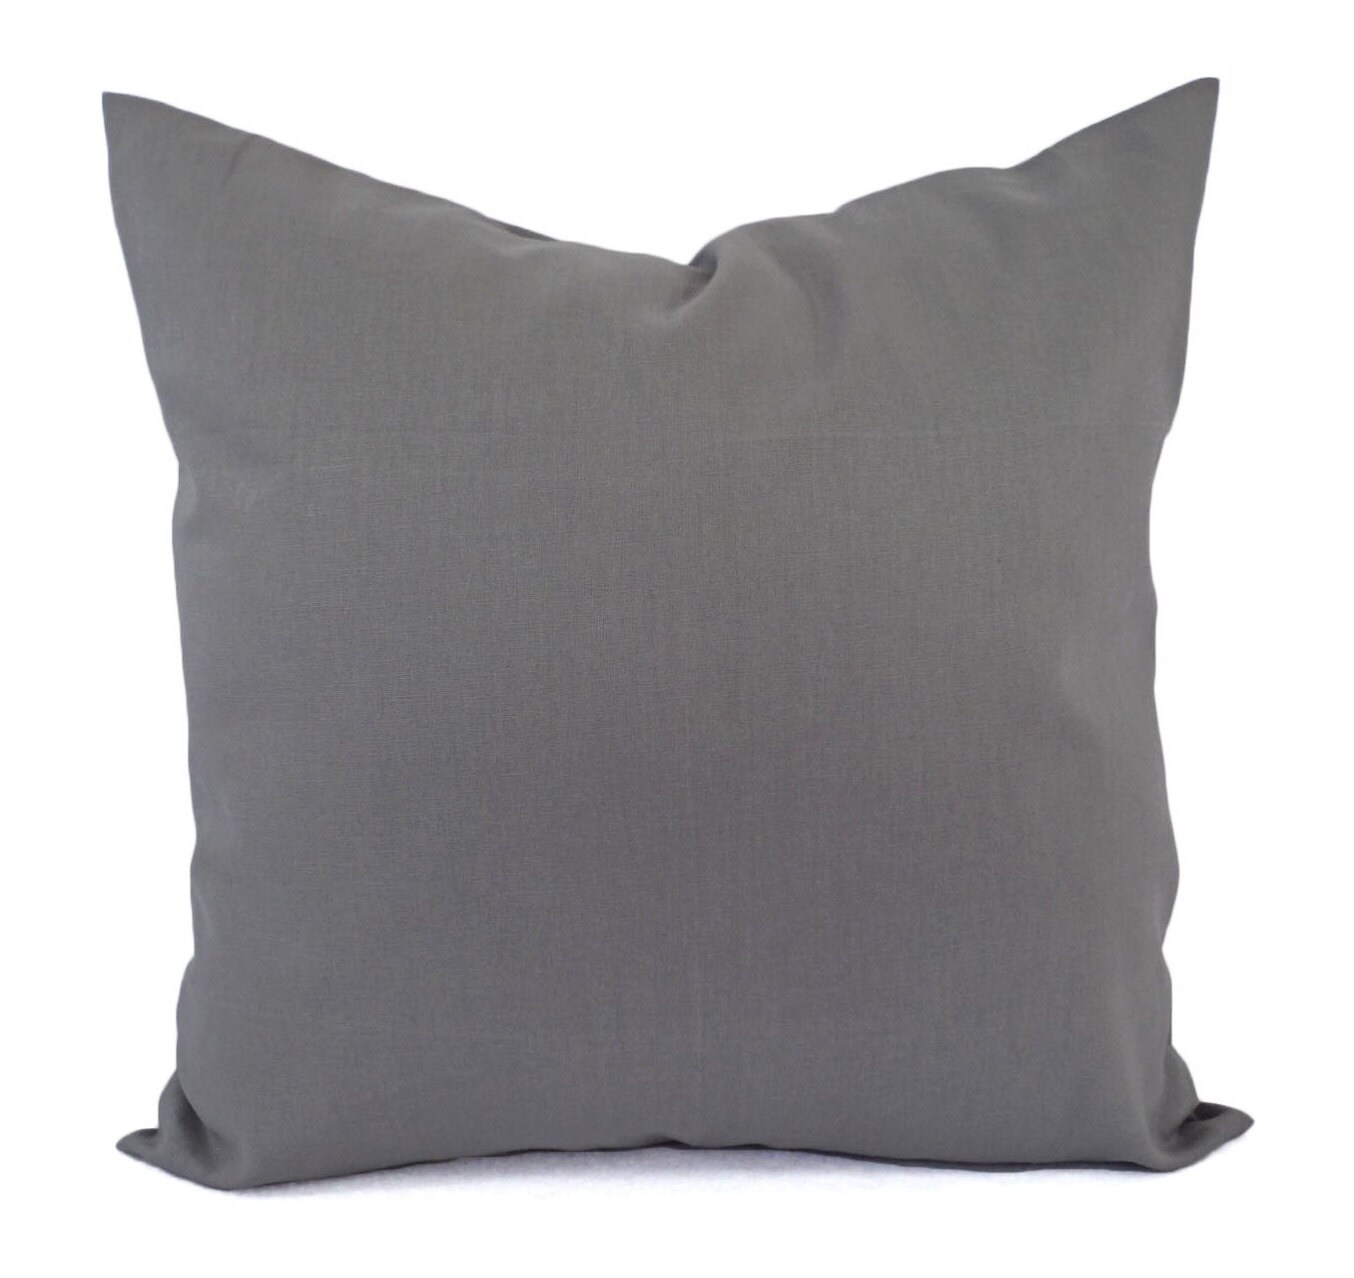 EC402 Olive Grey Embossed Wave Curve Throw Cushion Cover/Pillow Case*Custom Size 